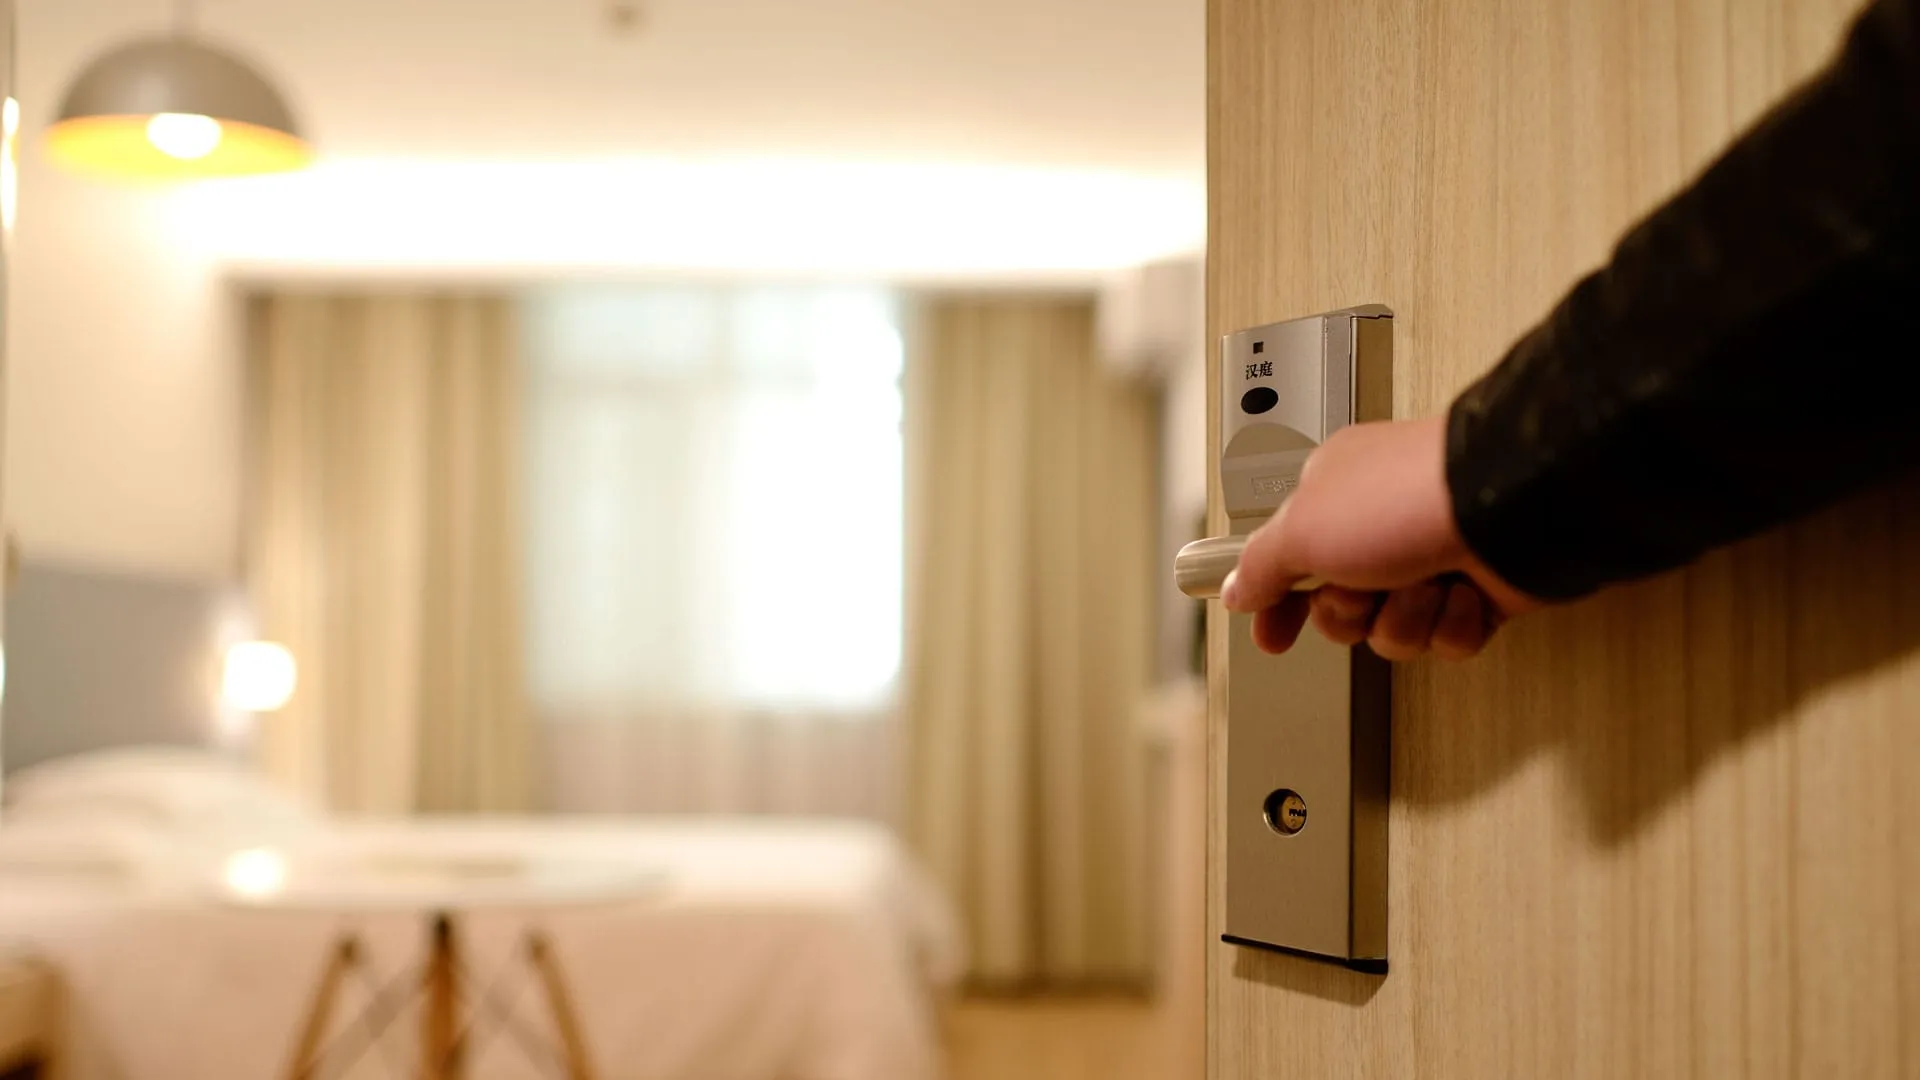 Hotel Safety tips